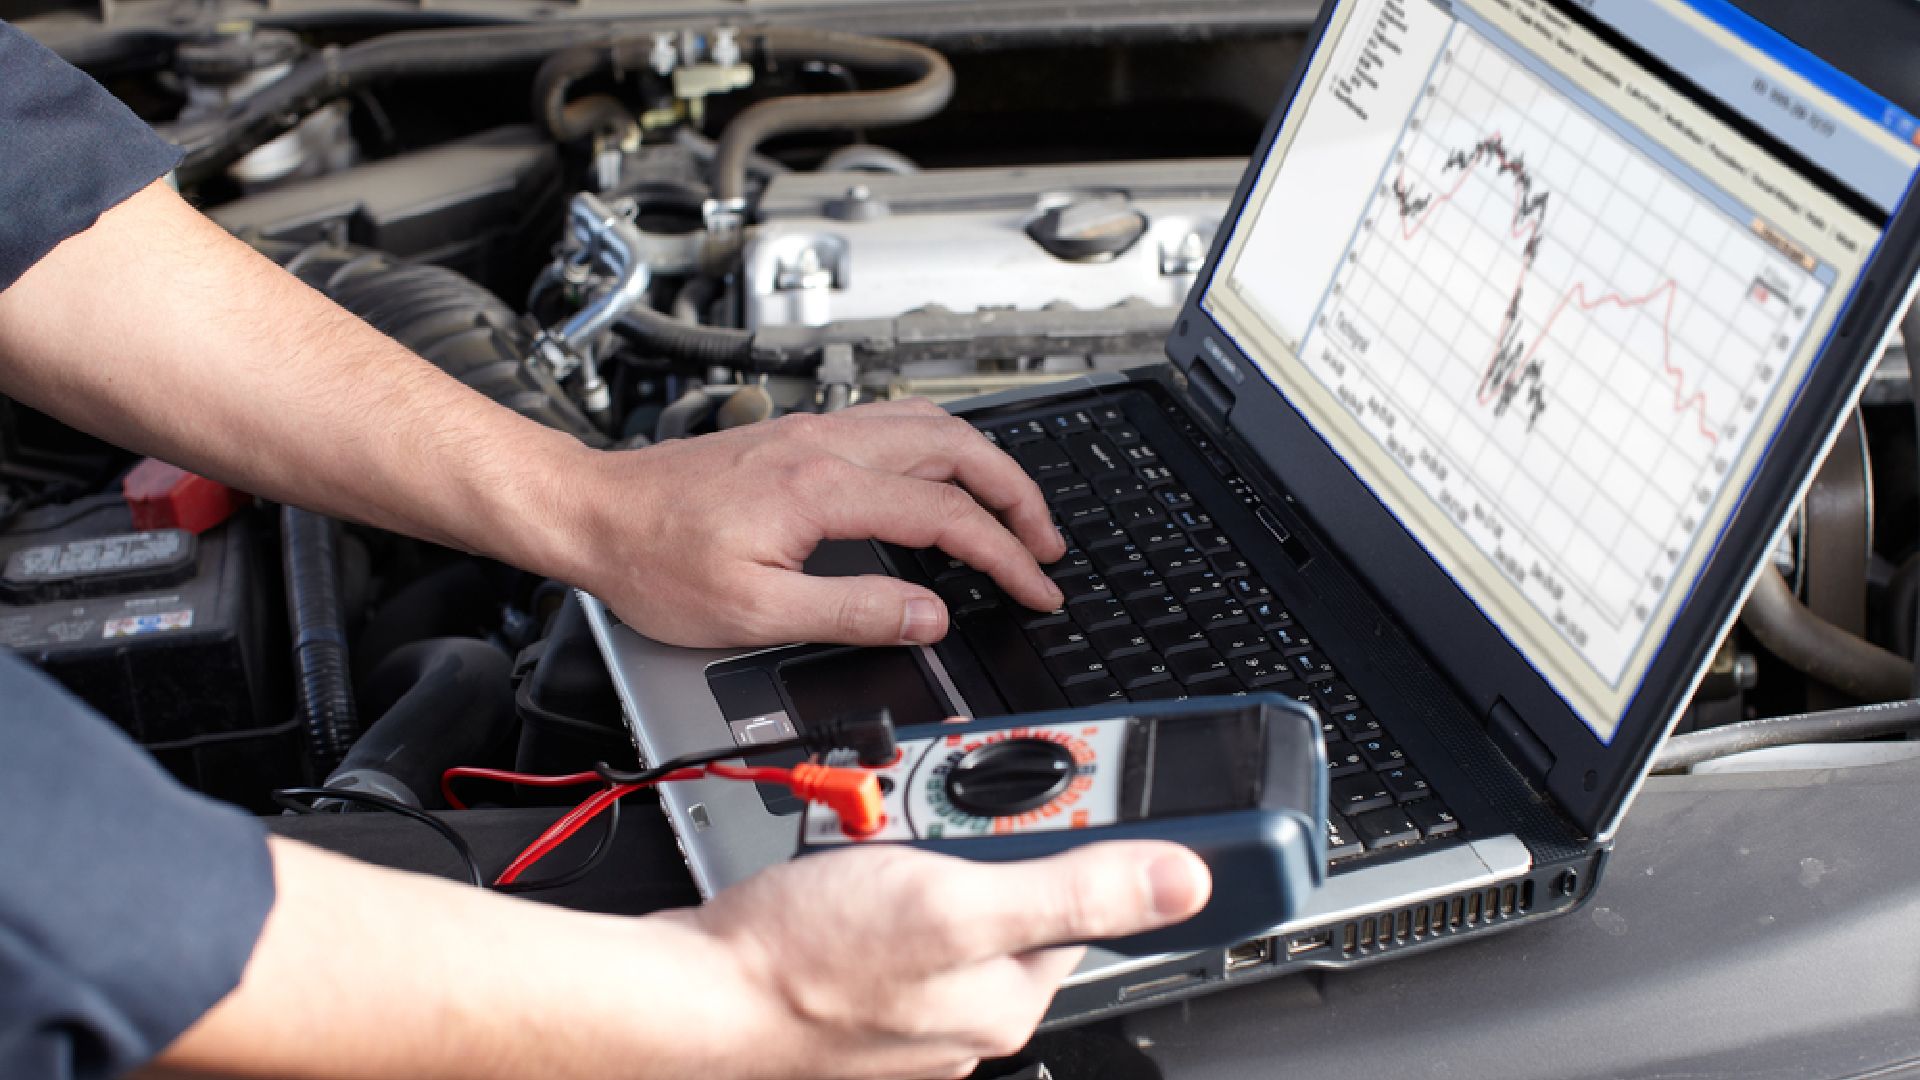 Get in touch with the mechanics at Southbrook Autos about their Computer Diagnostics service in Rangiora